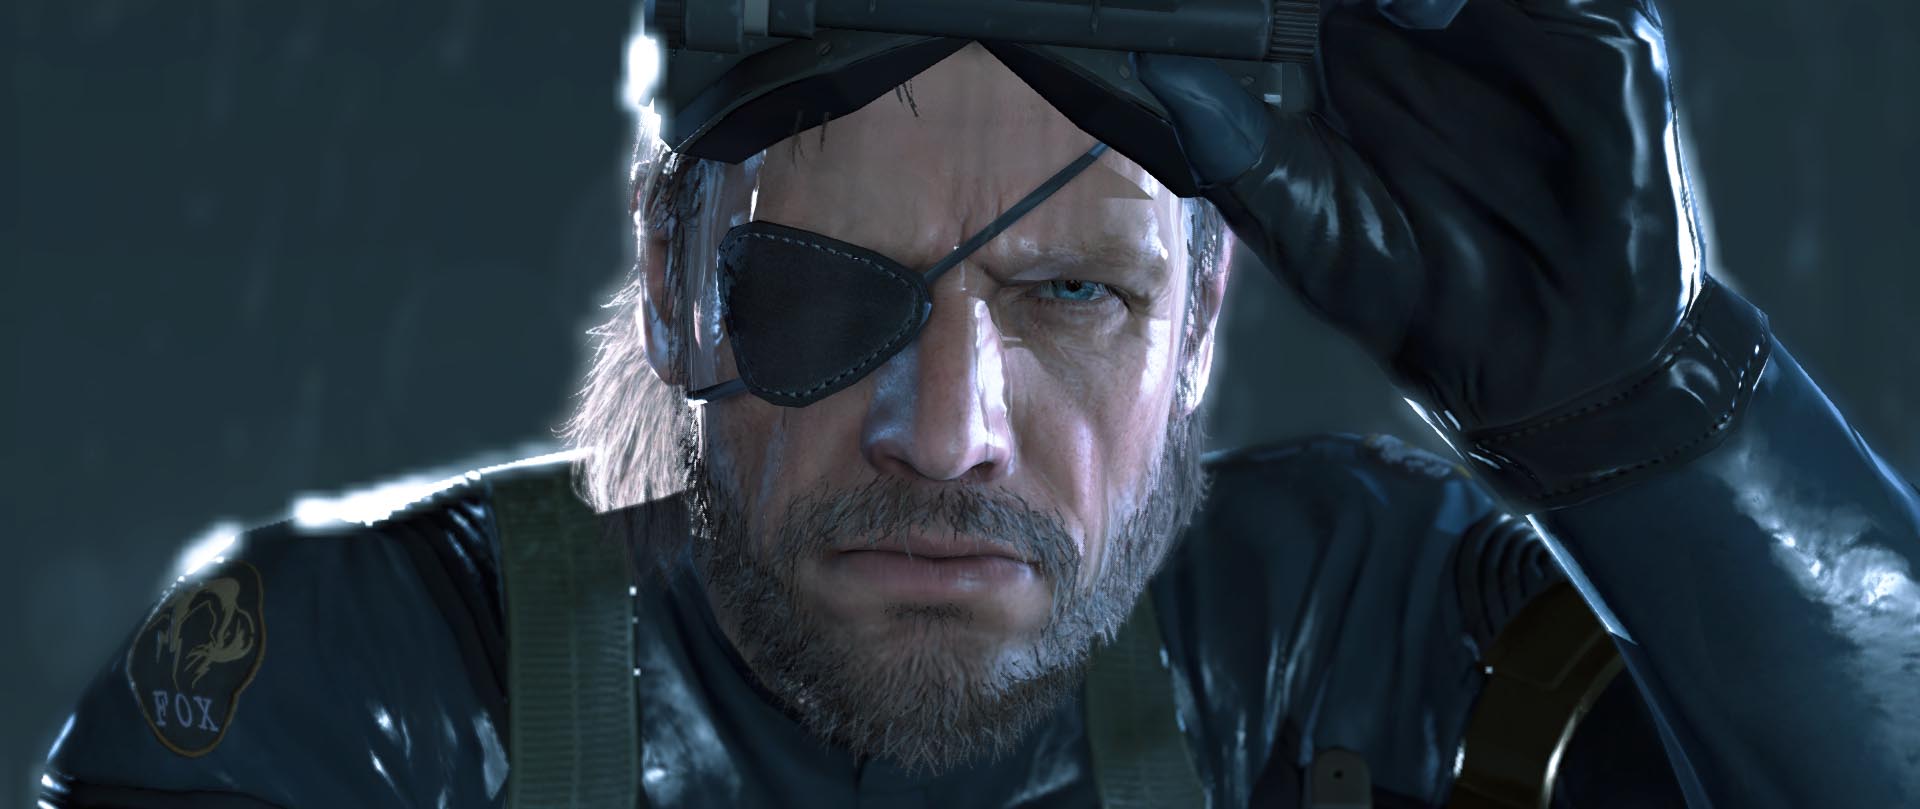 What We Want From The 'Metal Gear Solid' Movie - Supanova Comic Con & Gaming